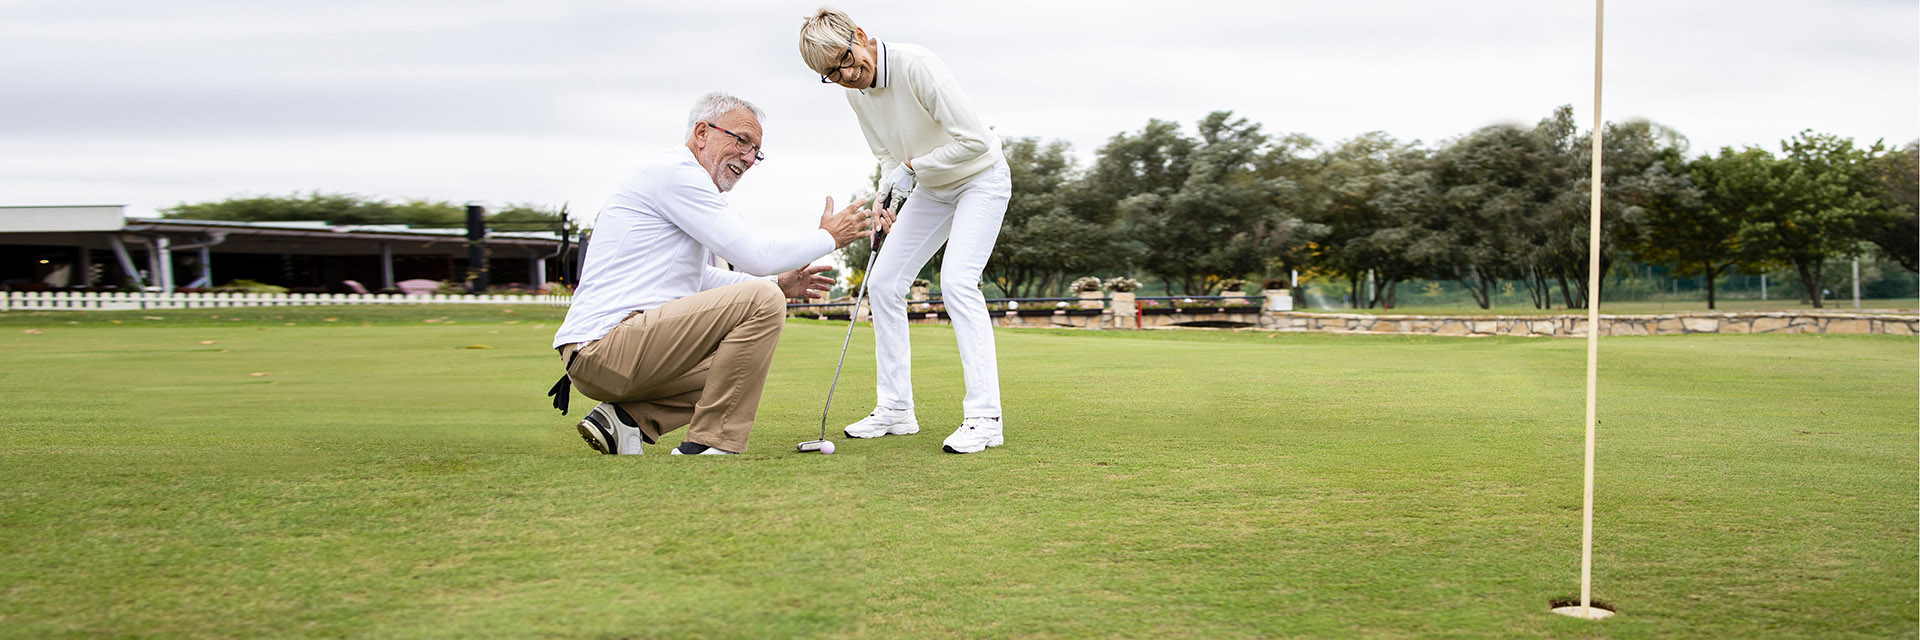 Mature couple on the golf course